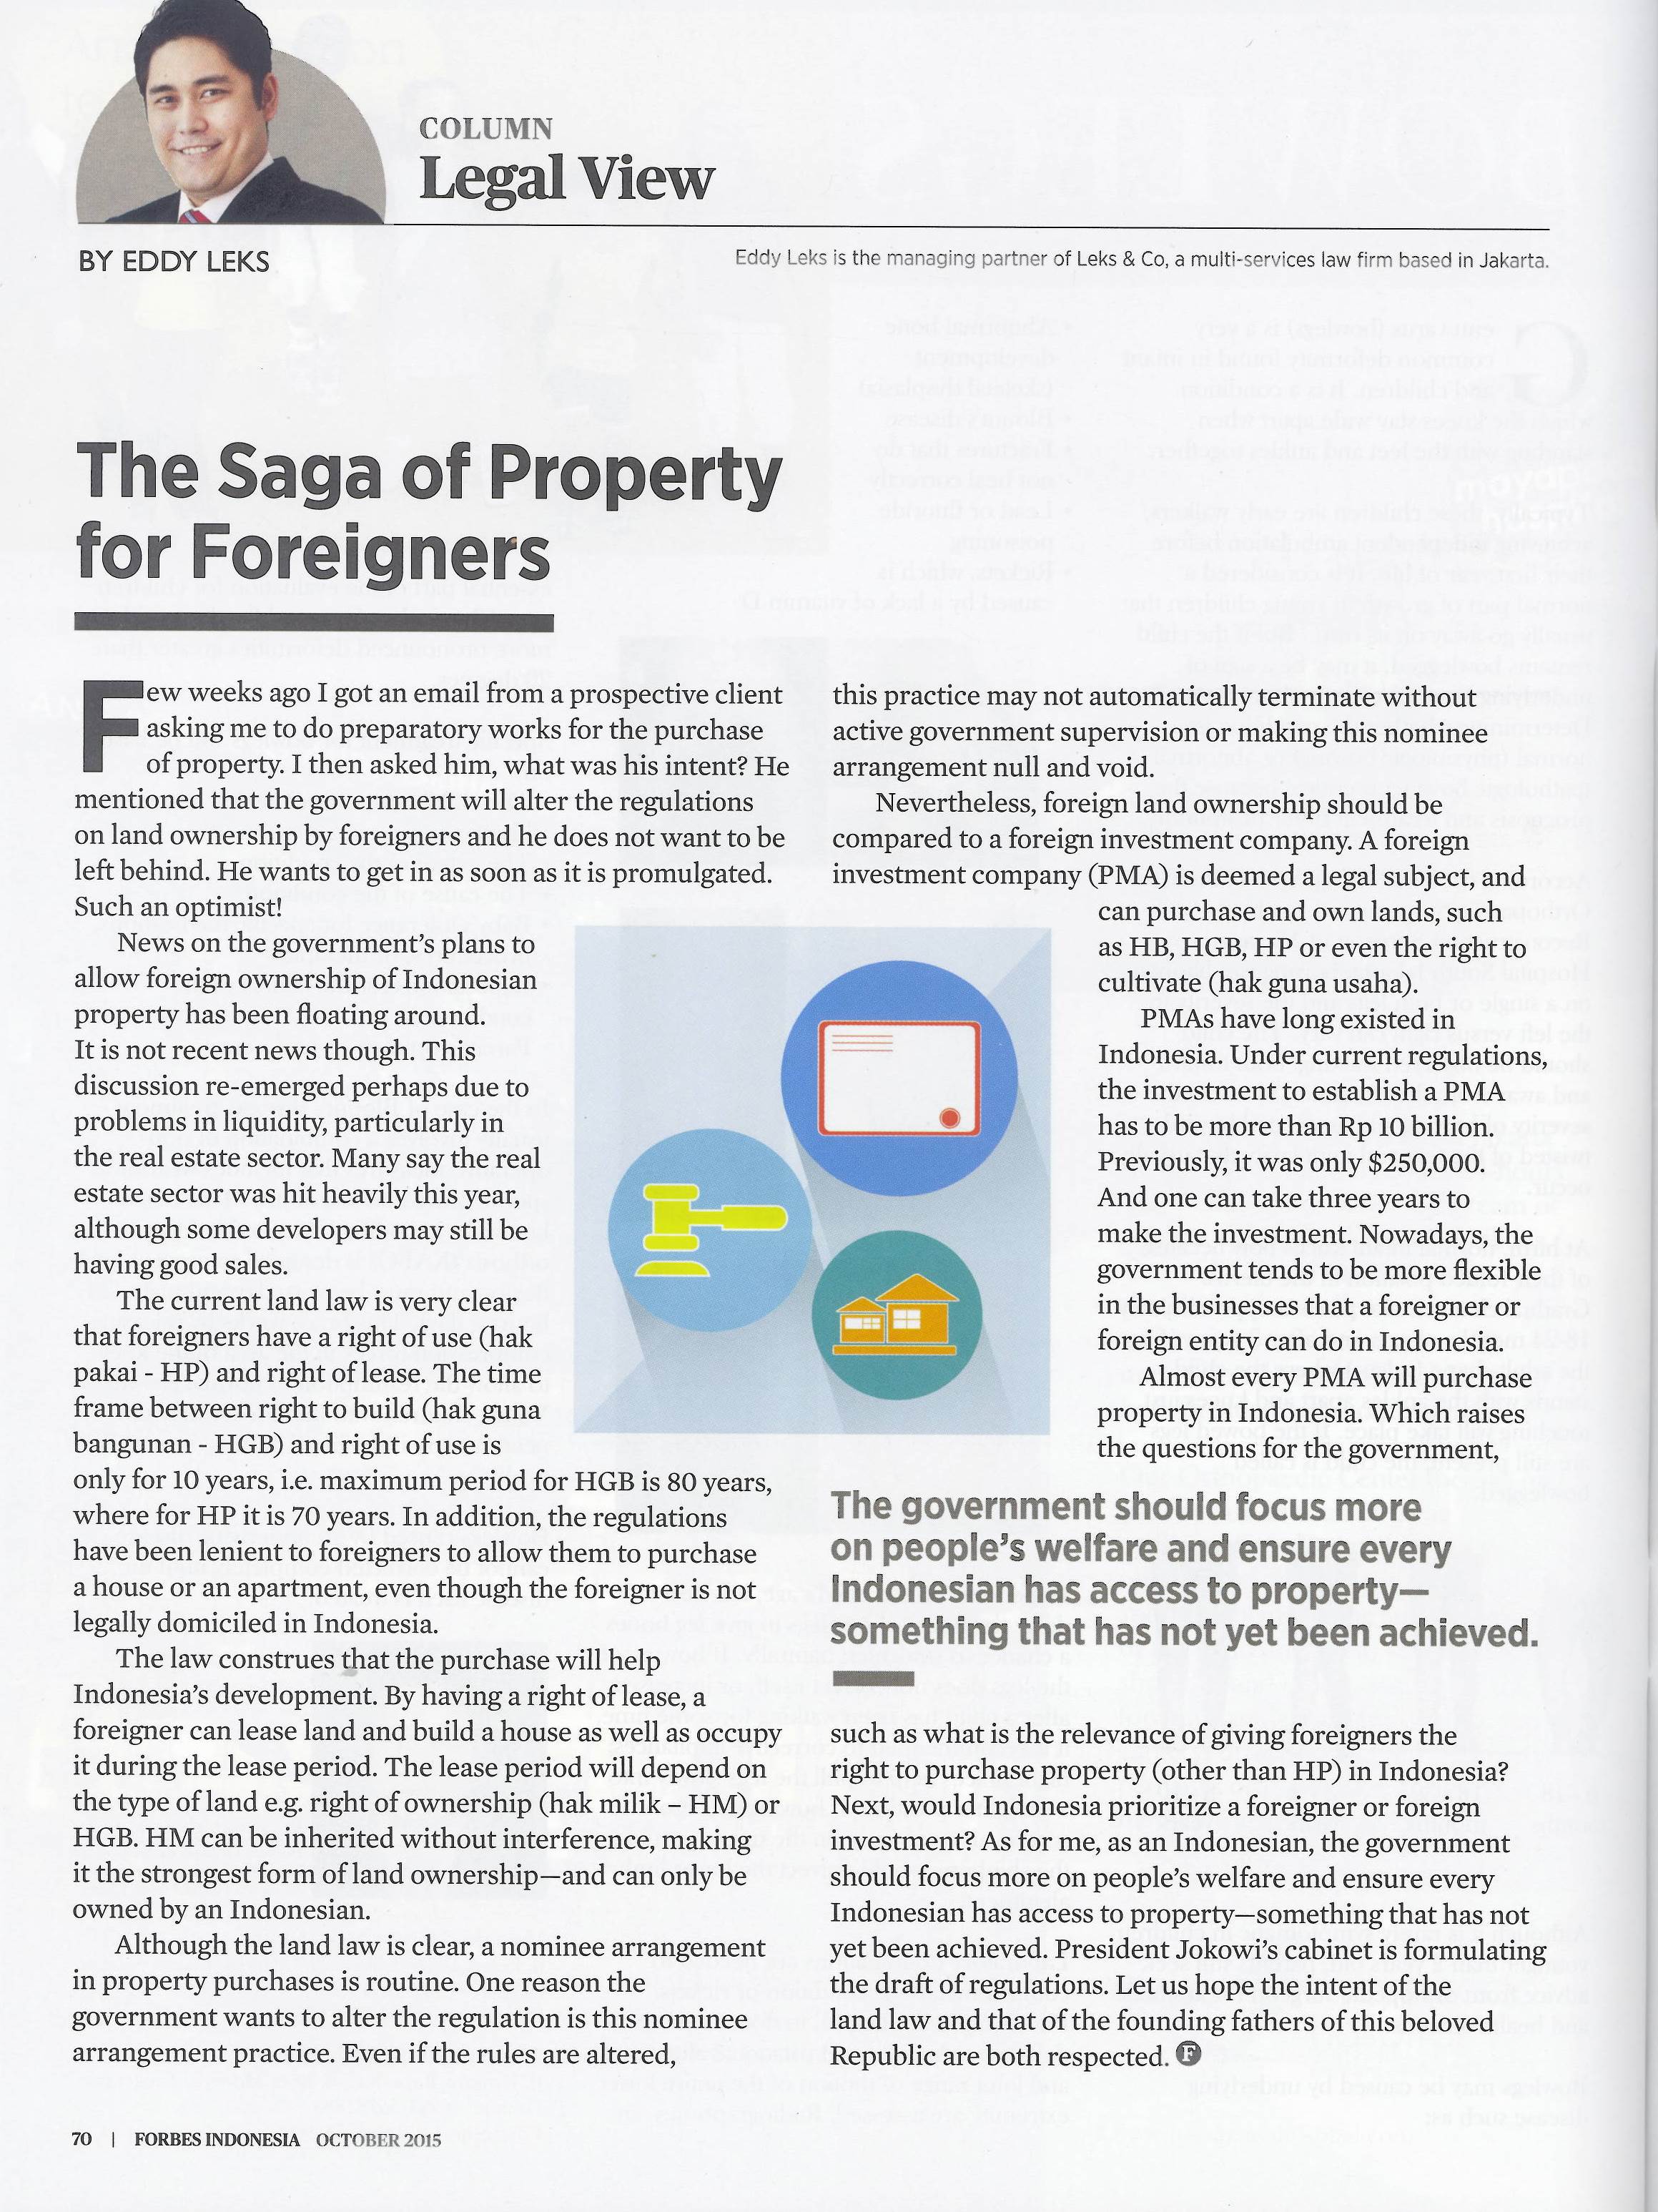 Legal View by Eddy Leks in Forbes Indonesia (October 2015)